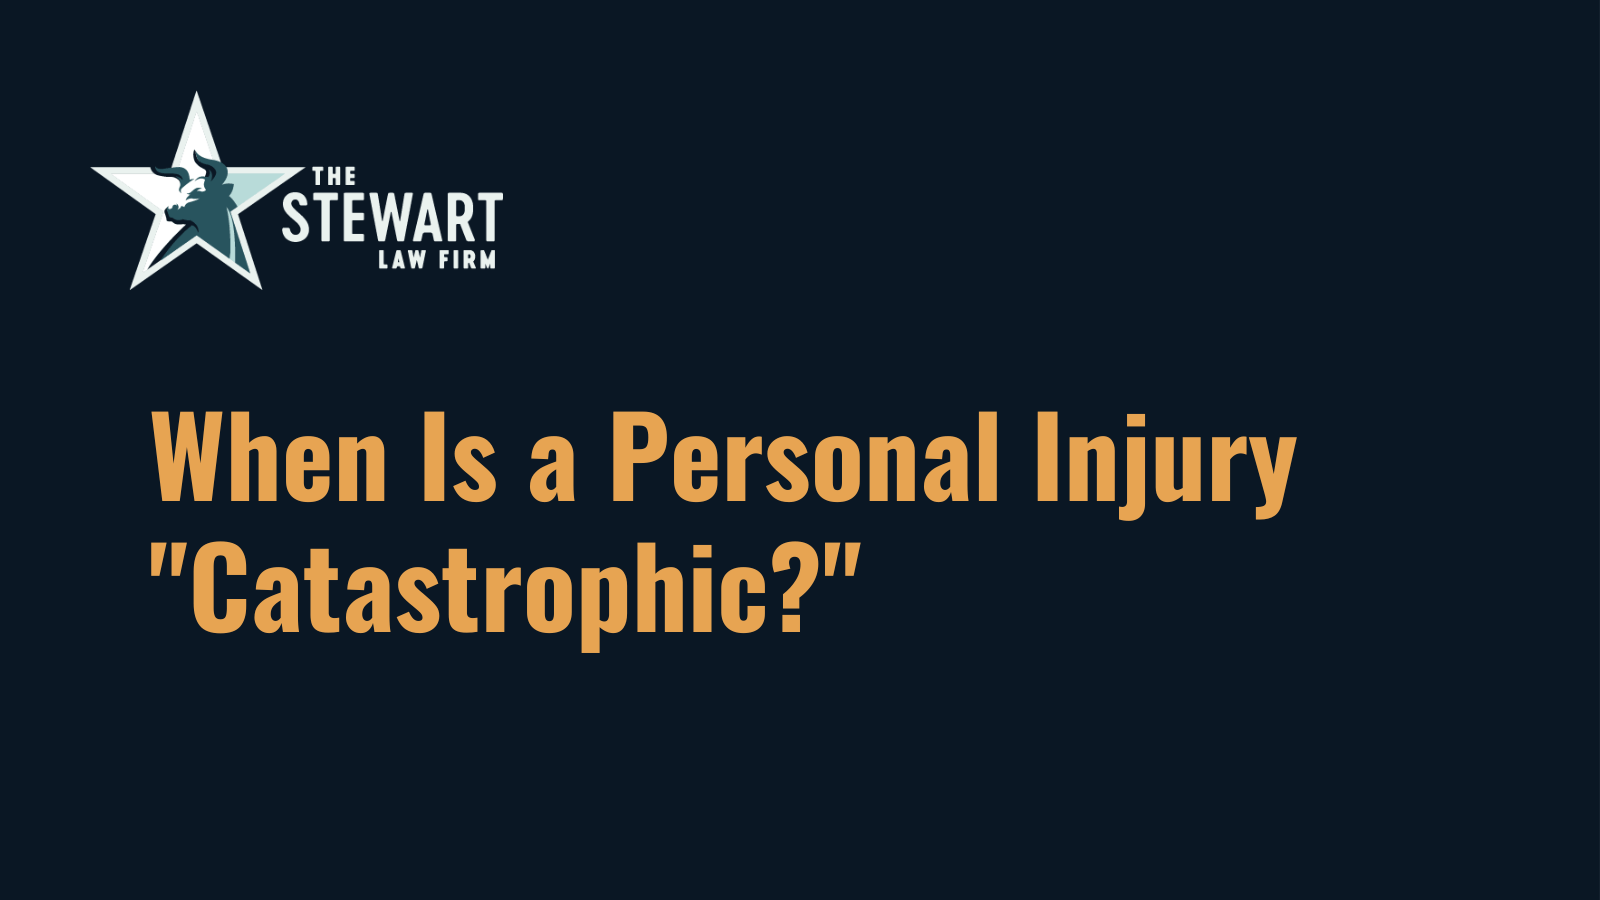 When Is a Personal Injury "Catastrophic" - the stewart law firm - austin texas personal injury lawyer